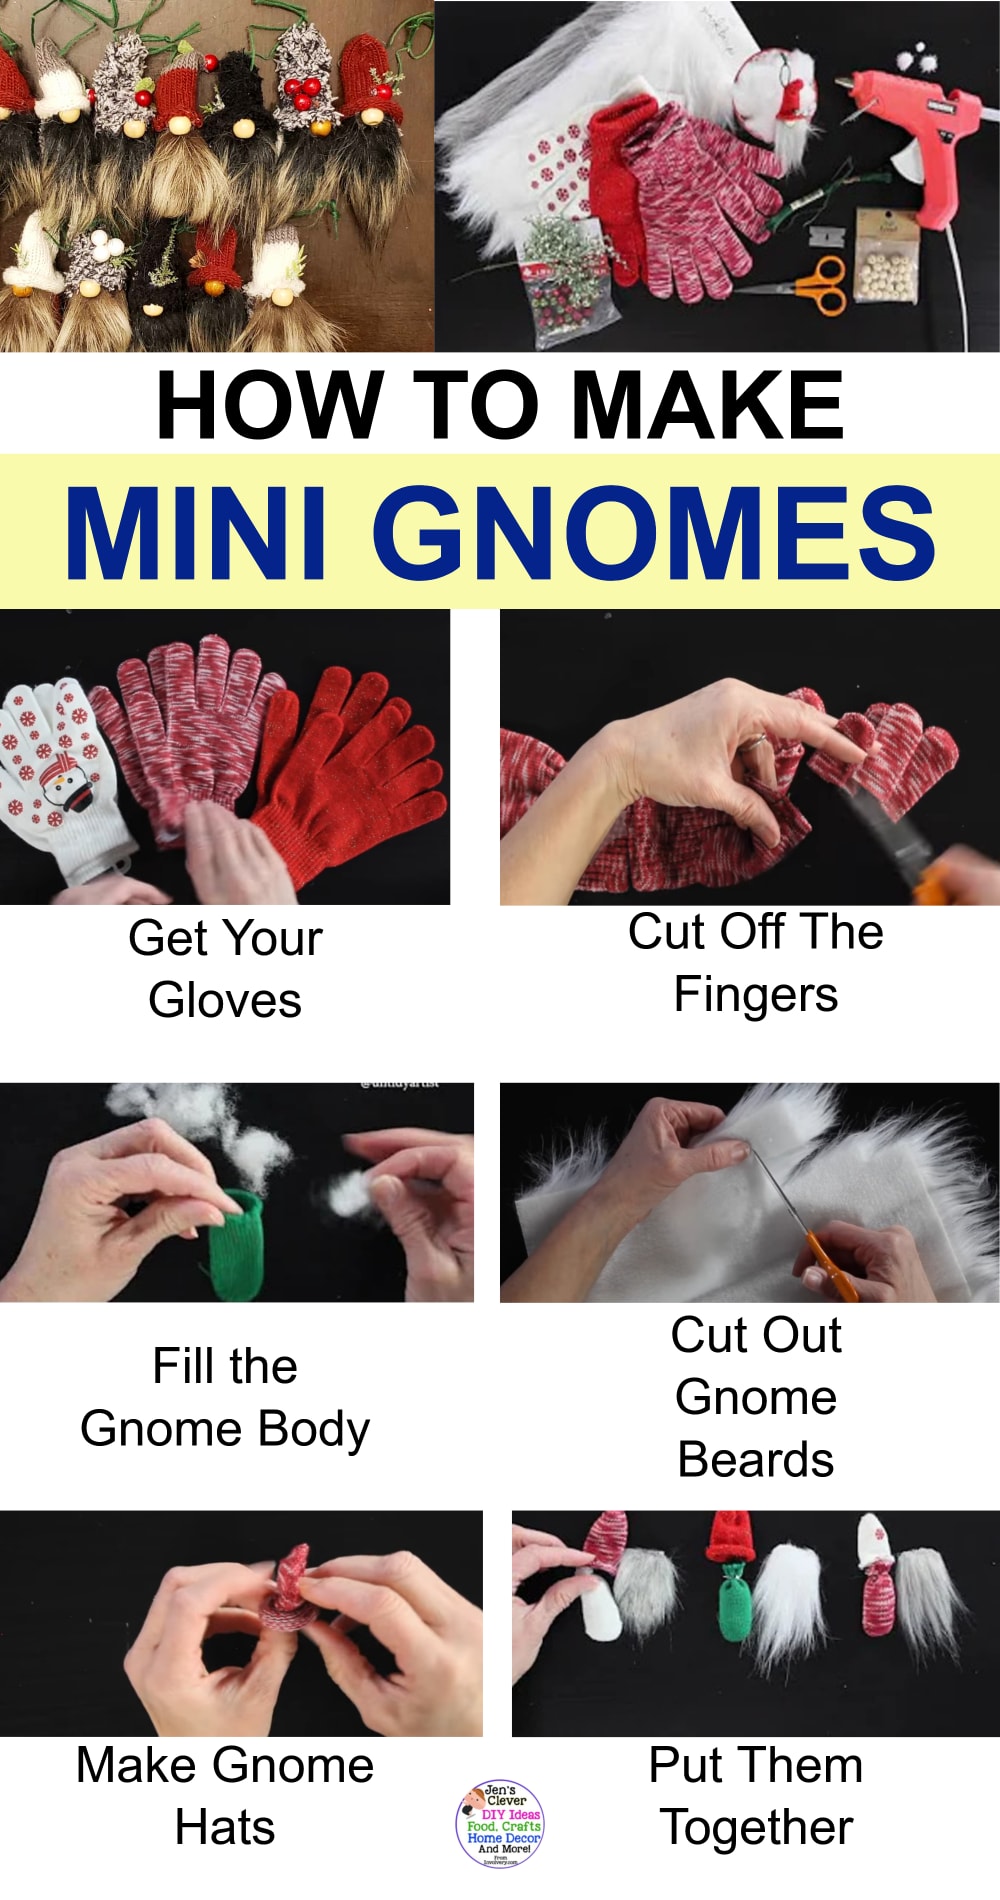 DIY gnome ornaments instructions - how to make mini Christmas gnome ornaments step by step